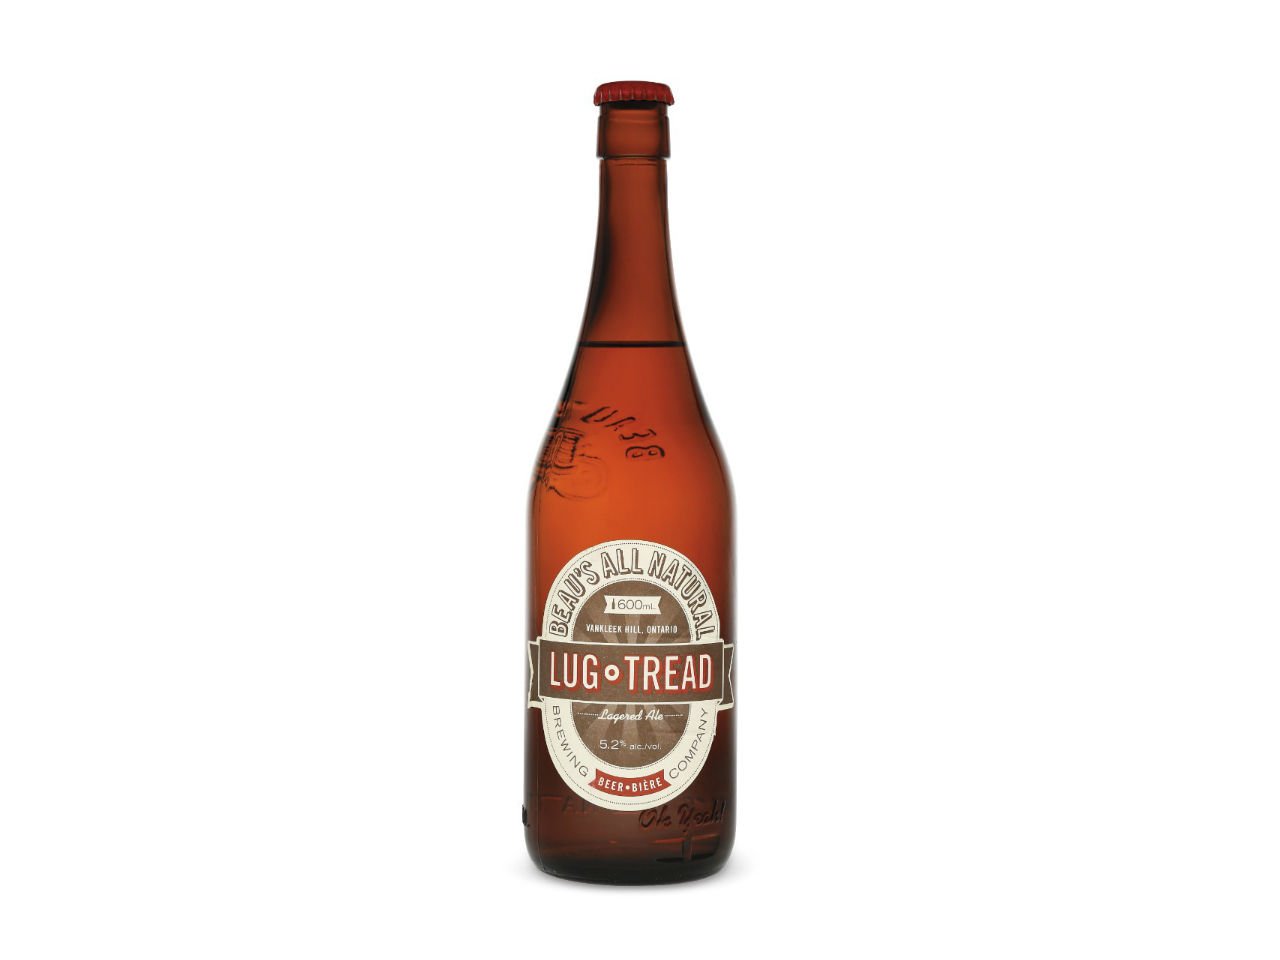 Beau's Lug Tread lagered ale in a bottle.